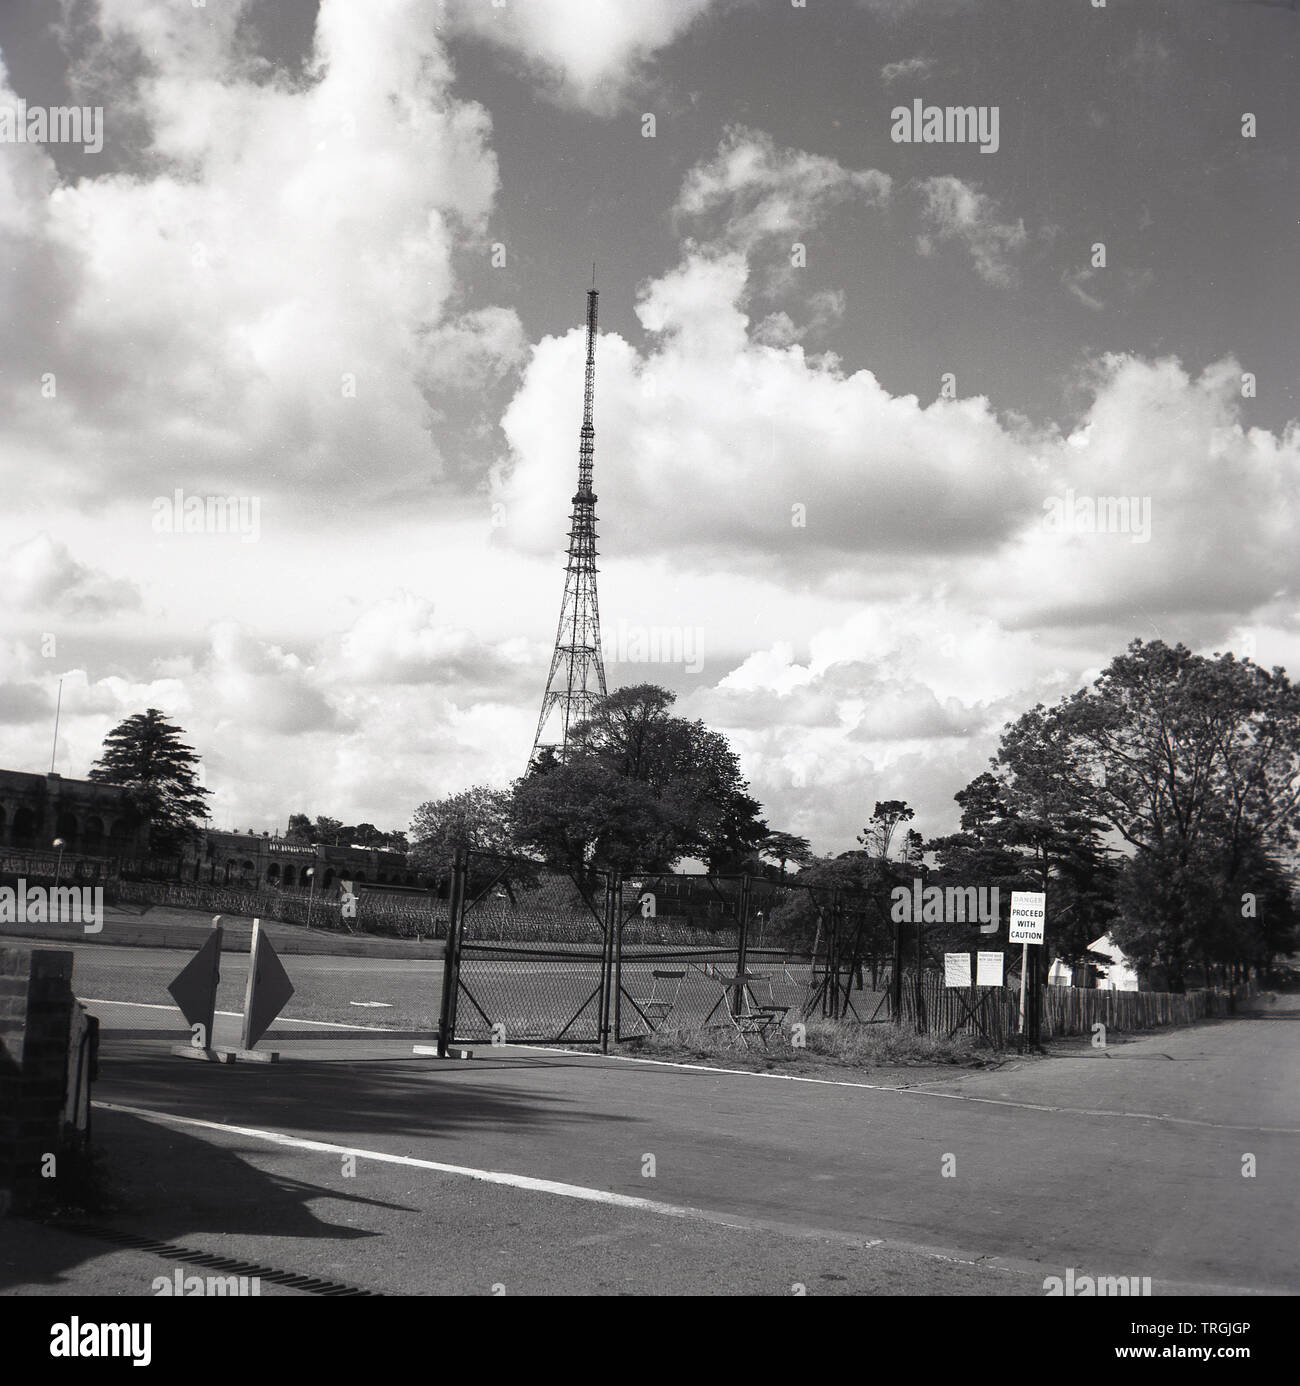 1960s, historical, Crystal Palace Park, showing a gated entrance to the motor racing track and in the distance the UHF broadcasting tower, South London, England, UK. Completed in 1957, Crystal Palace tower is the tallest free-standing lattice transmitting structure in the UK. Stock Photo